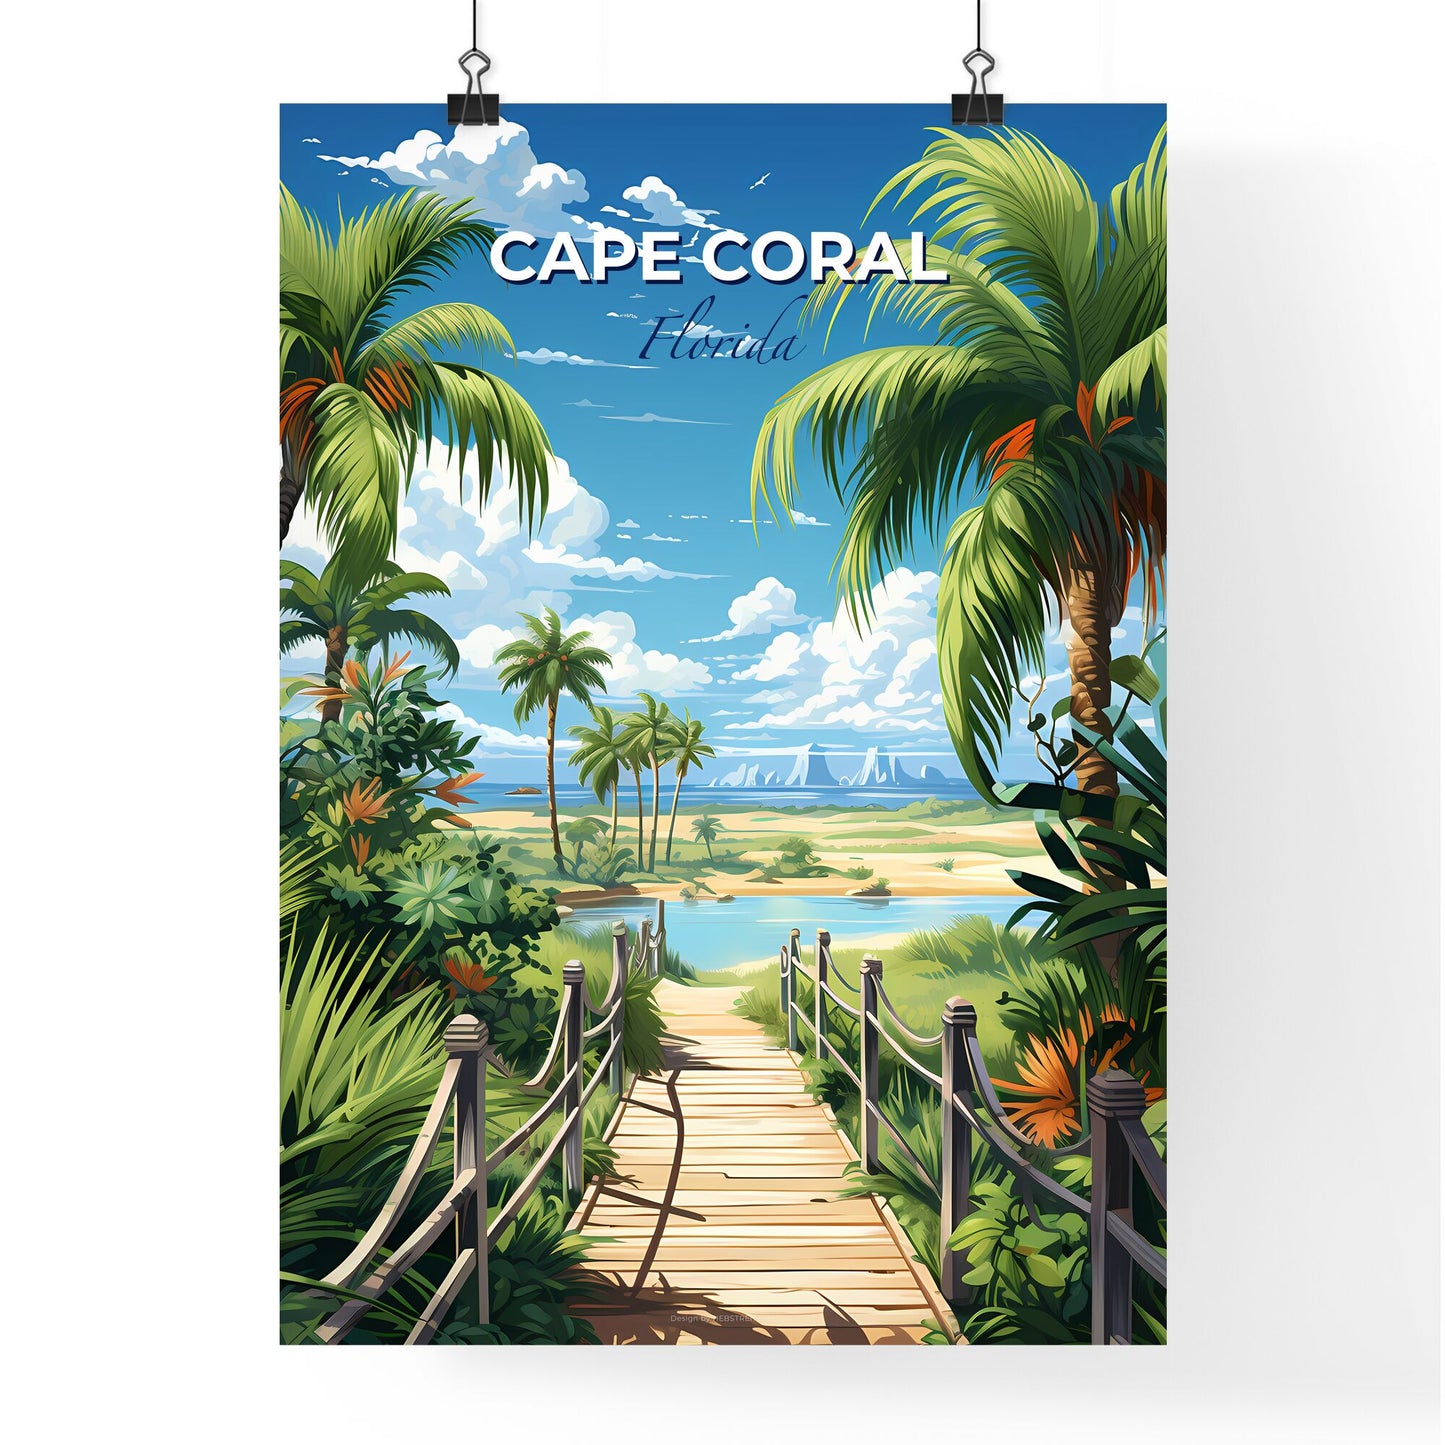 Cape Coral, Florida, A Poster of a wood bridge leading to a beach Default Title